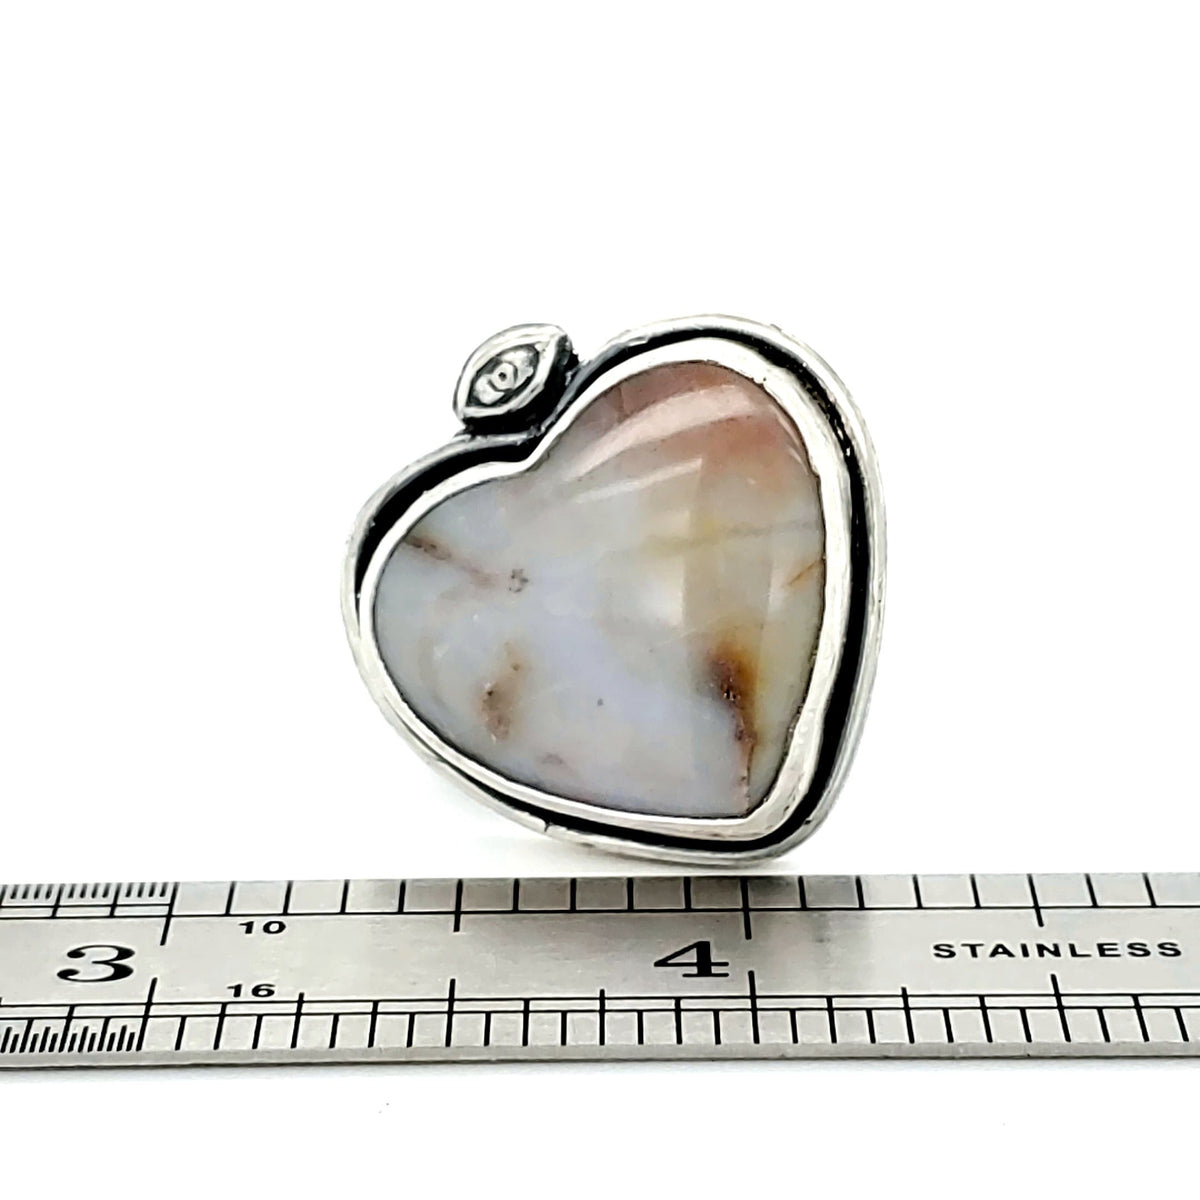 janet lasher Jewelry Ring Lavender Plume Agate Eye Heart Ring